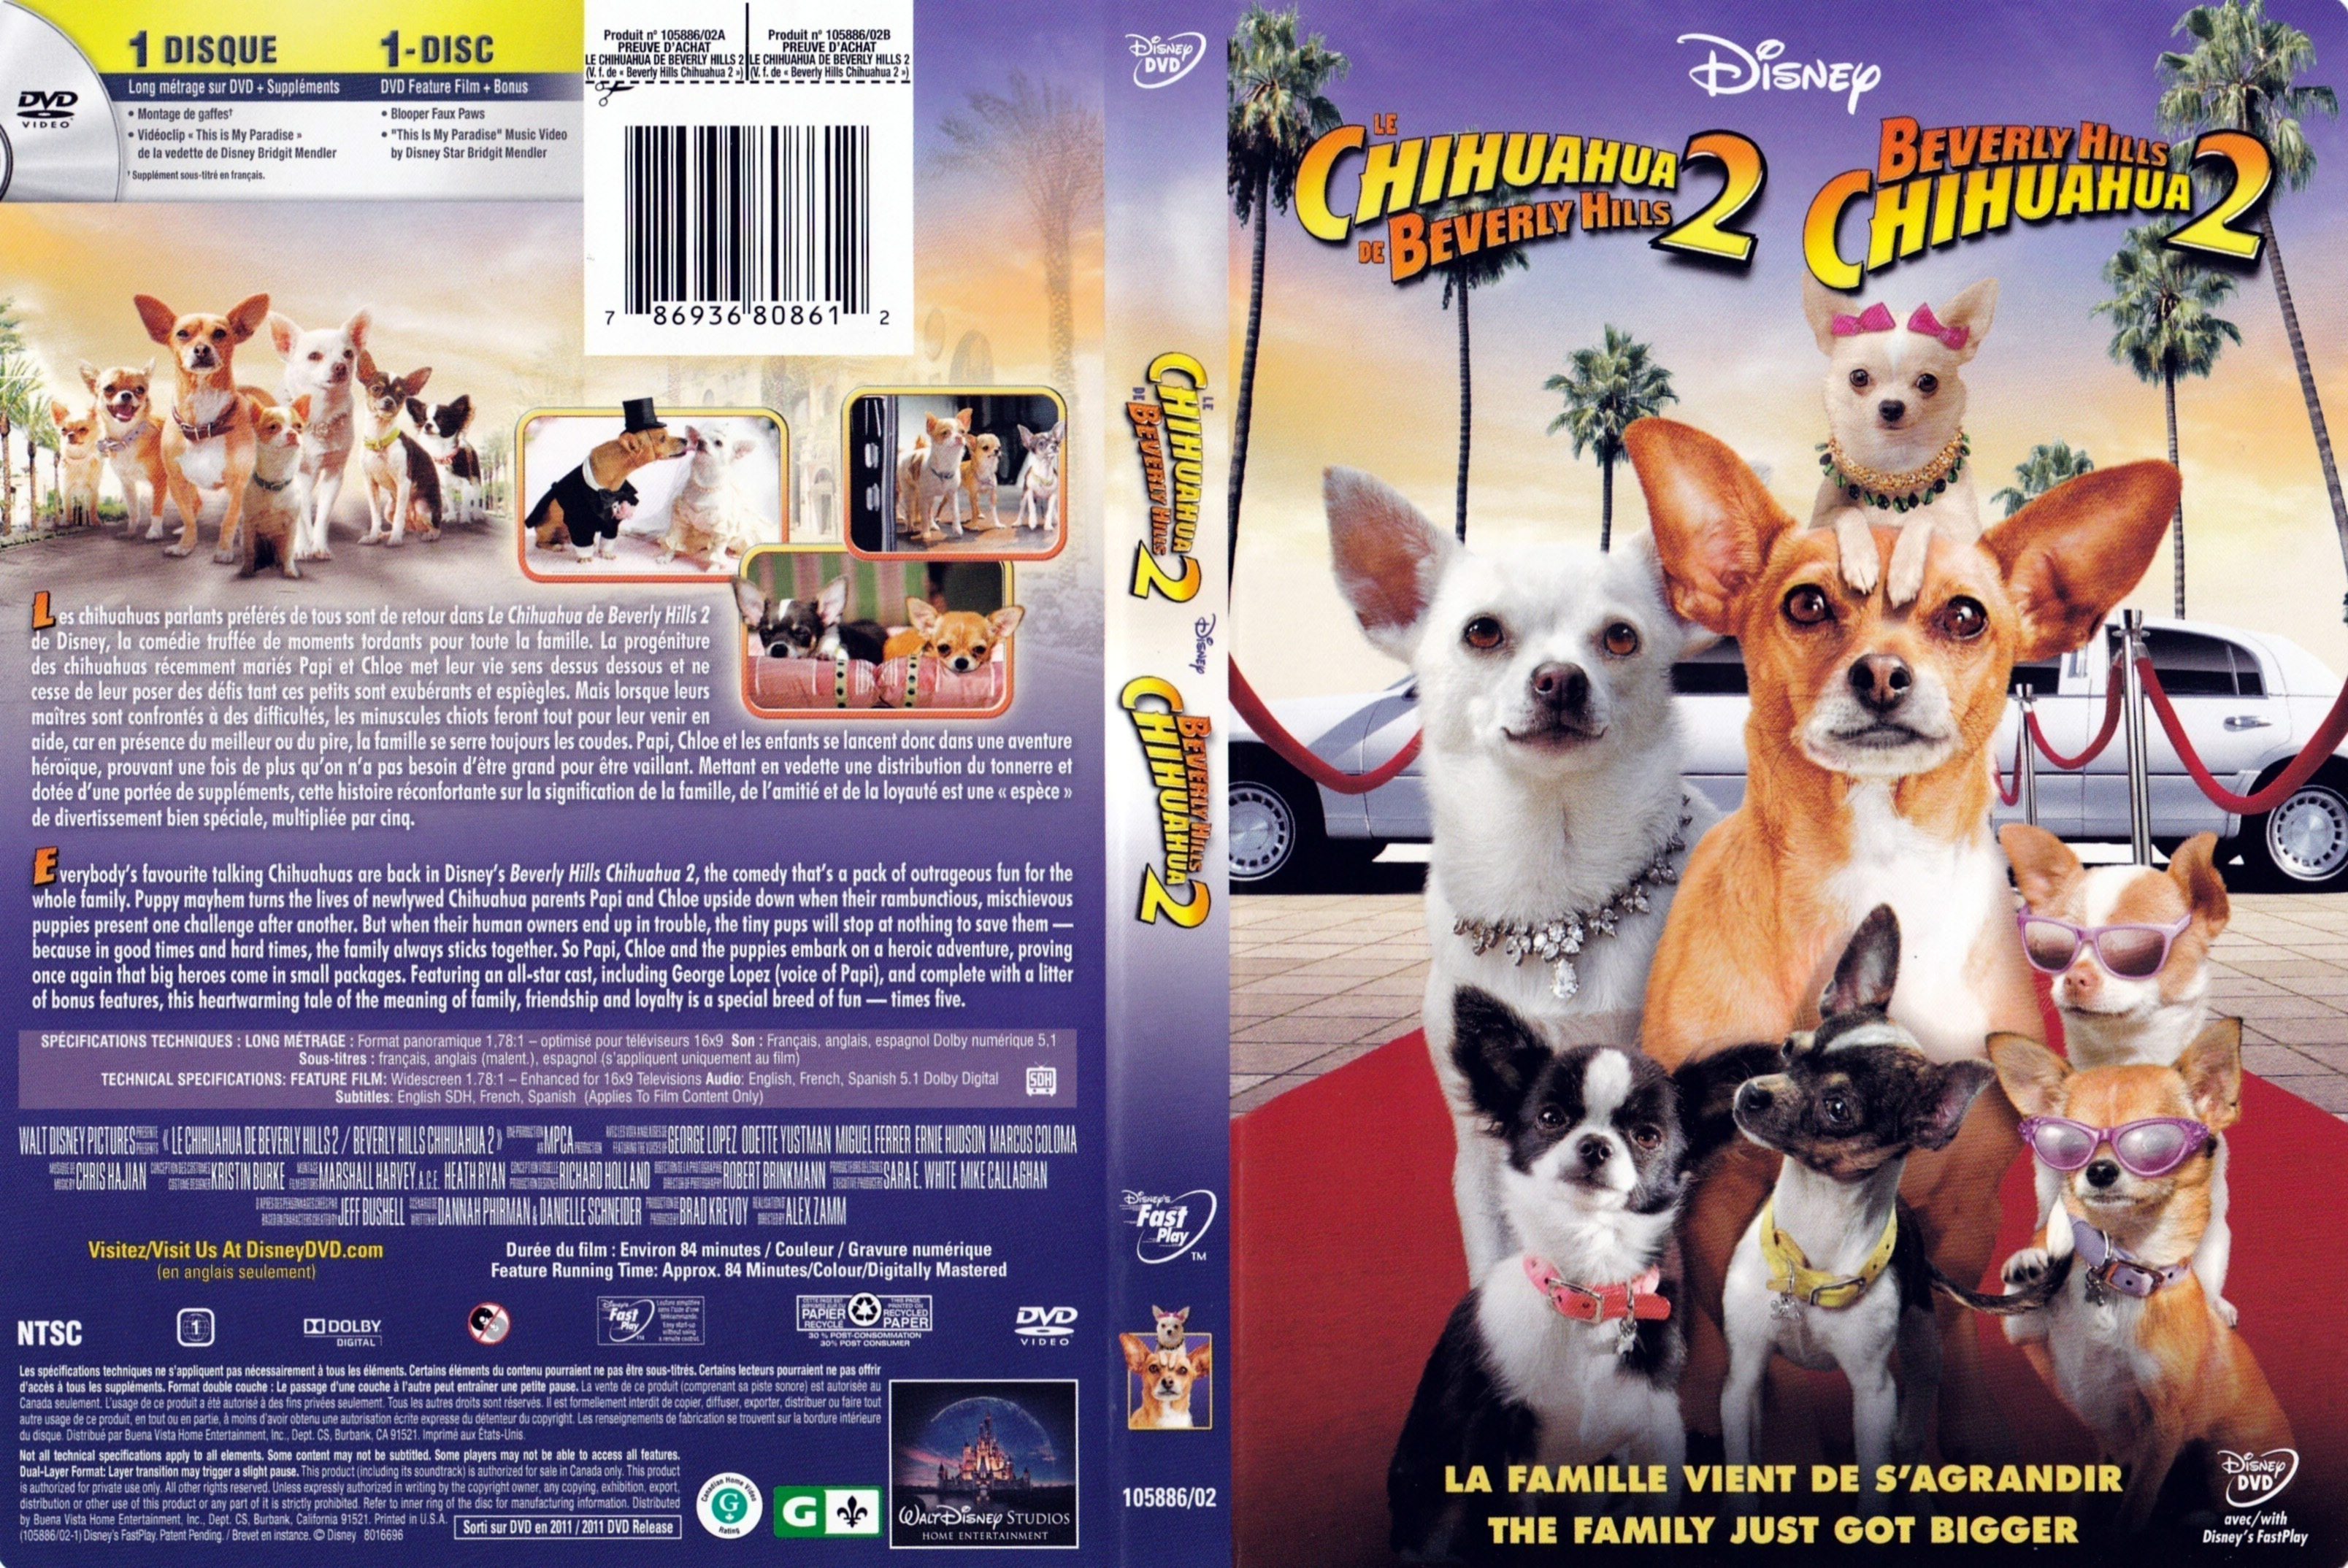 Jaquette DVD Le chihuahua de beverly hills 2 - Beverly Hills chihuahua 2 (Canadienne)